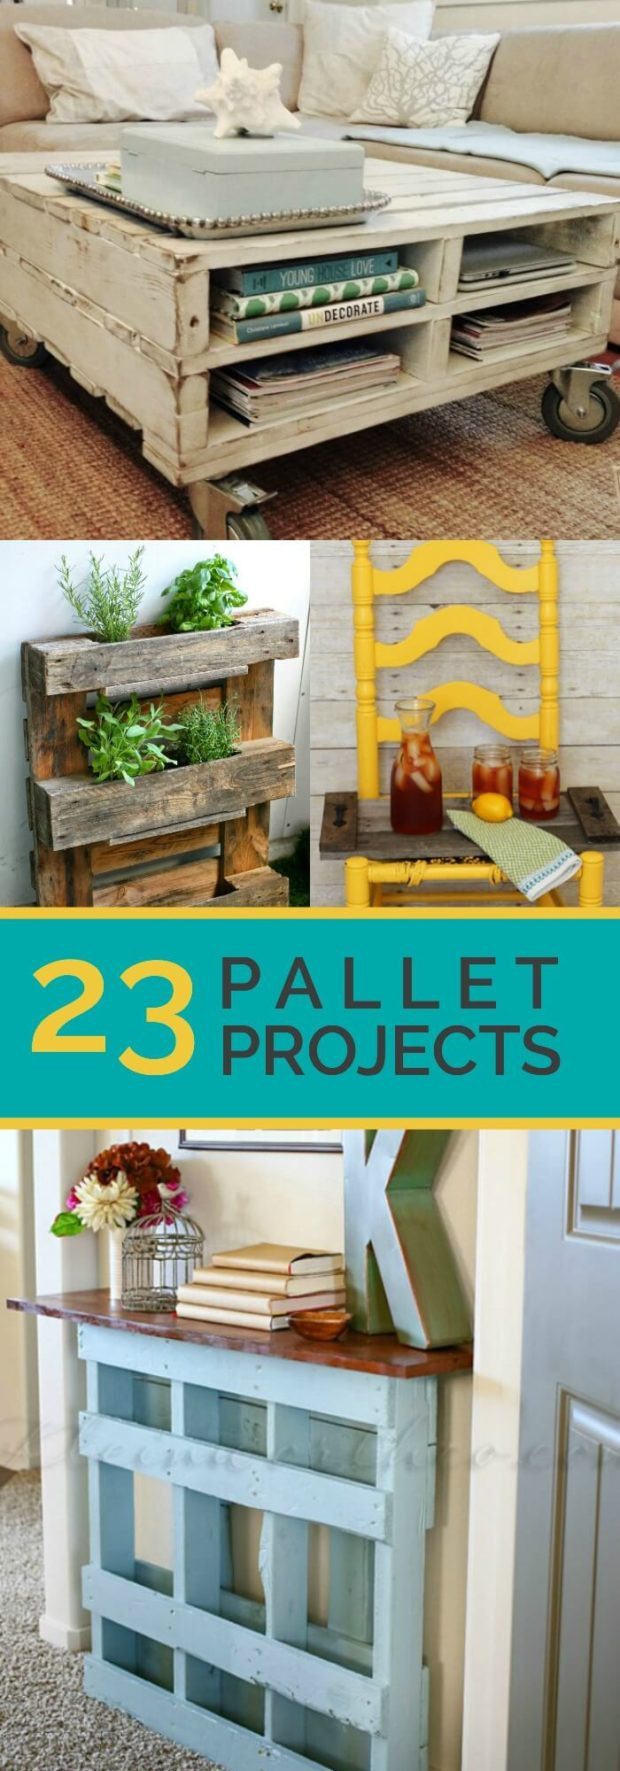 DIY With Wood Pallets
 23 Awesome DIY Wood Pallet Ideas Spaceships and Laser Beams